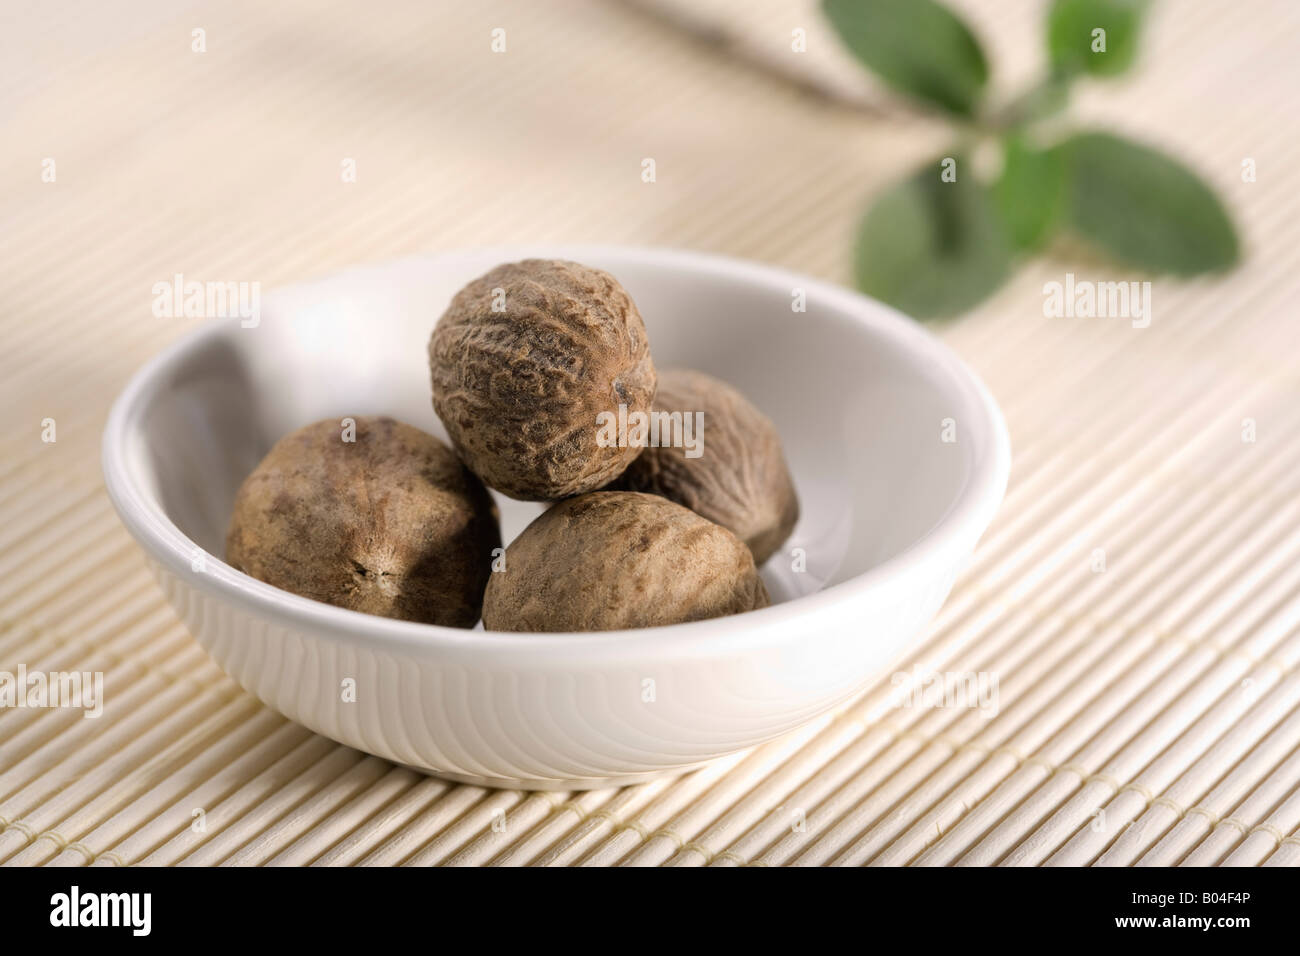 nutmeg in small white china bowl, on straw mat, garnished with leaves Stock Photo